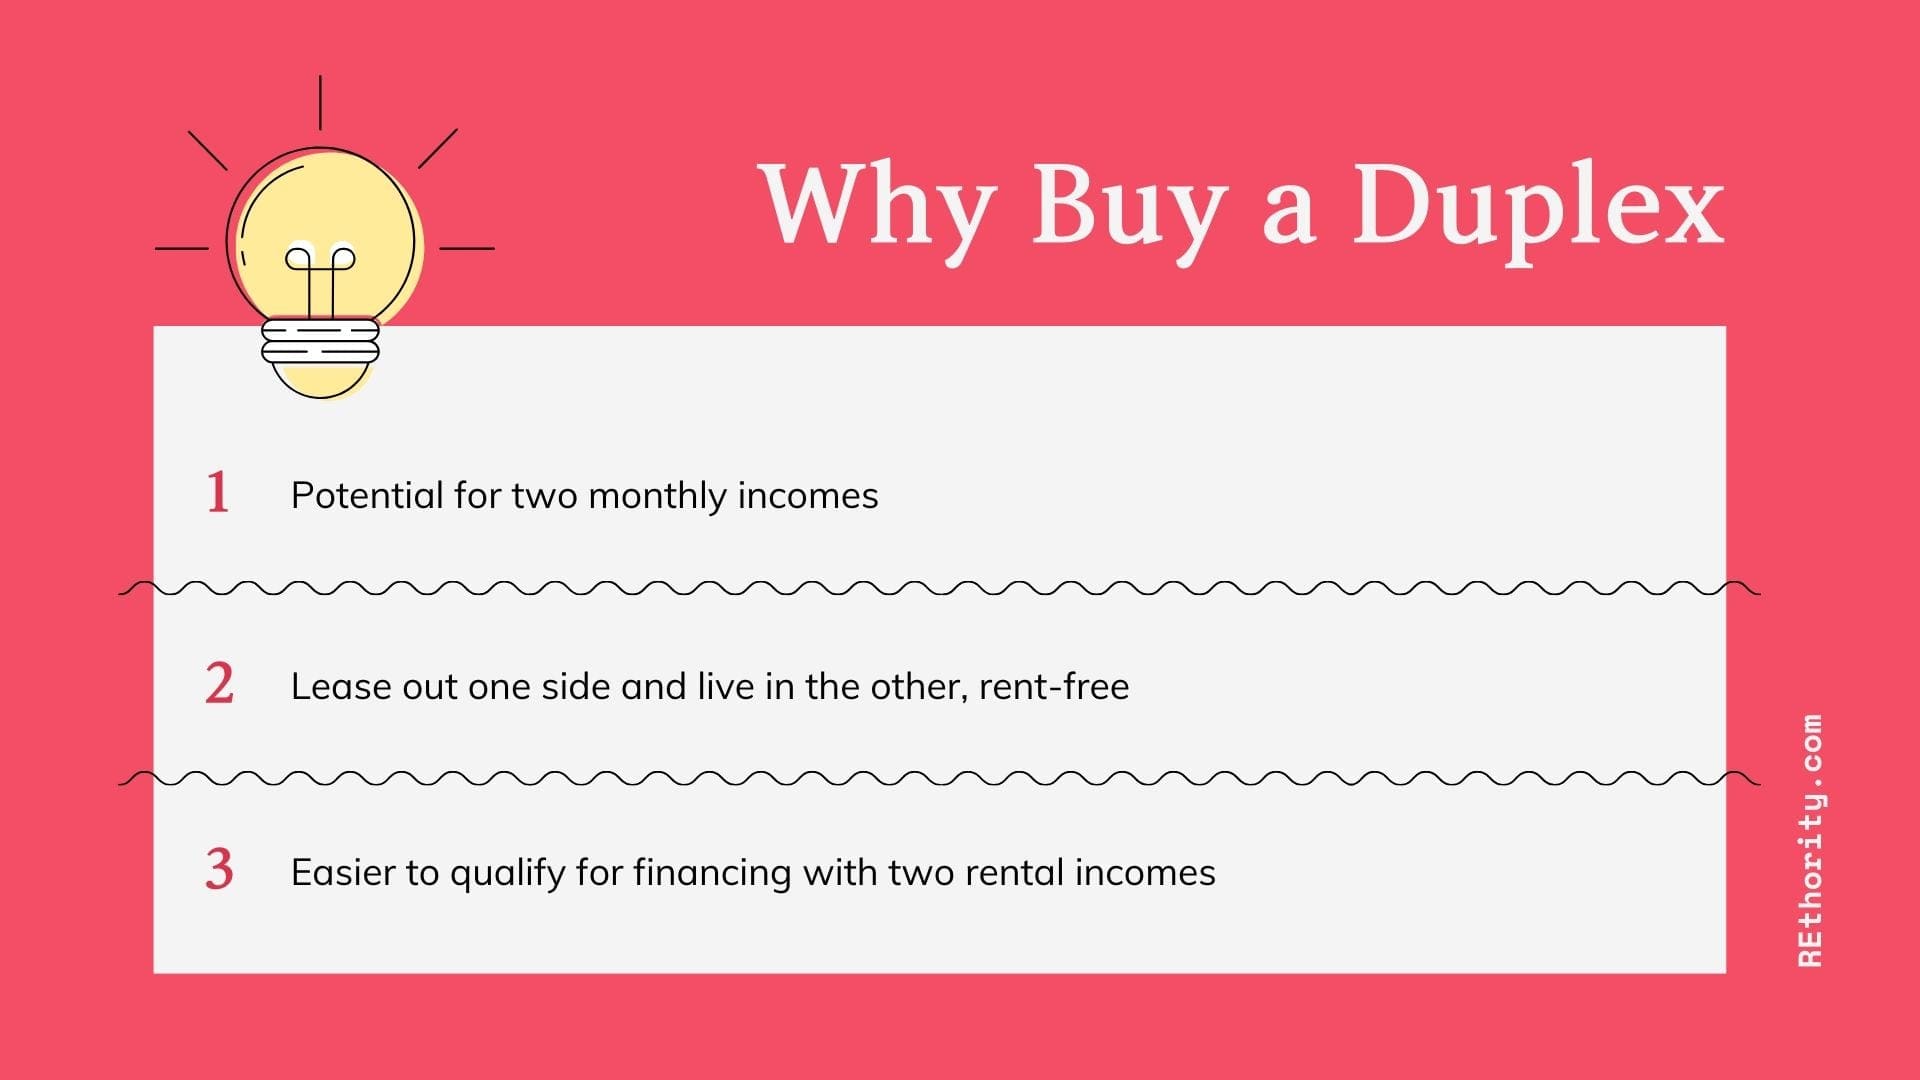 Benefits of buying a duplex including potential for two incomes from one property, intro to investing, and easier to qualify for financing with to incomes